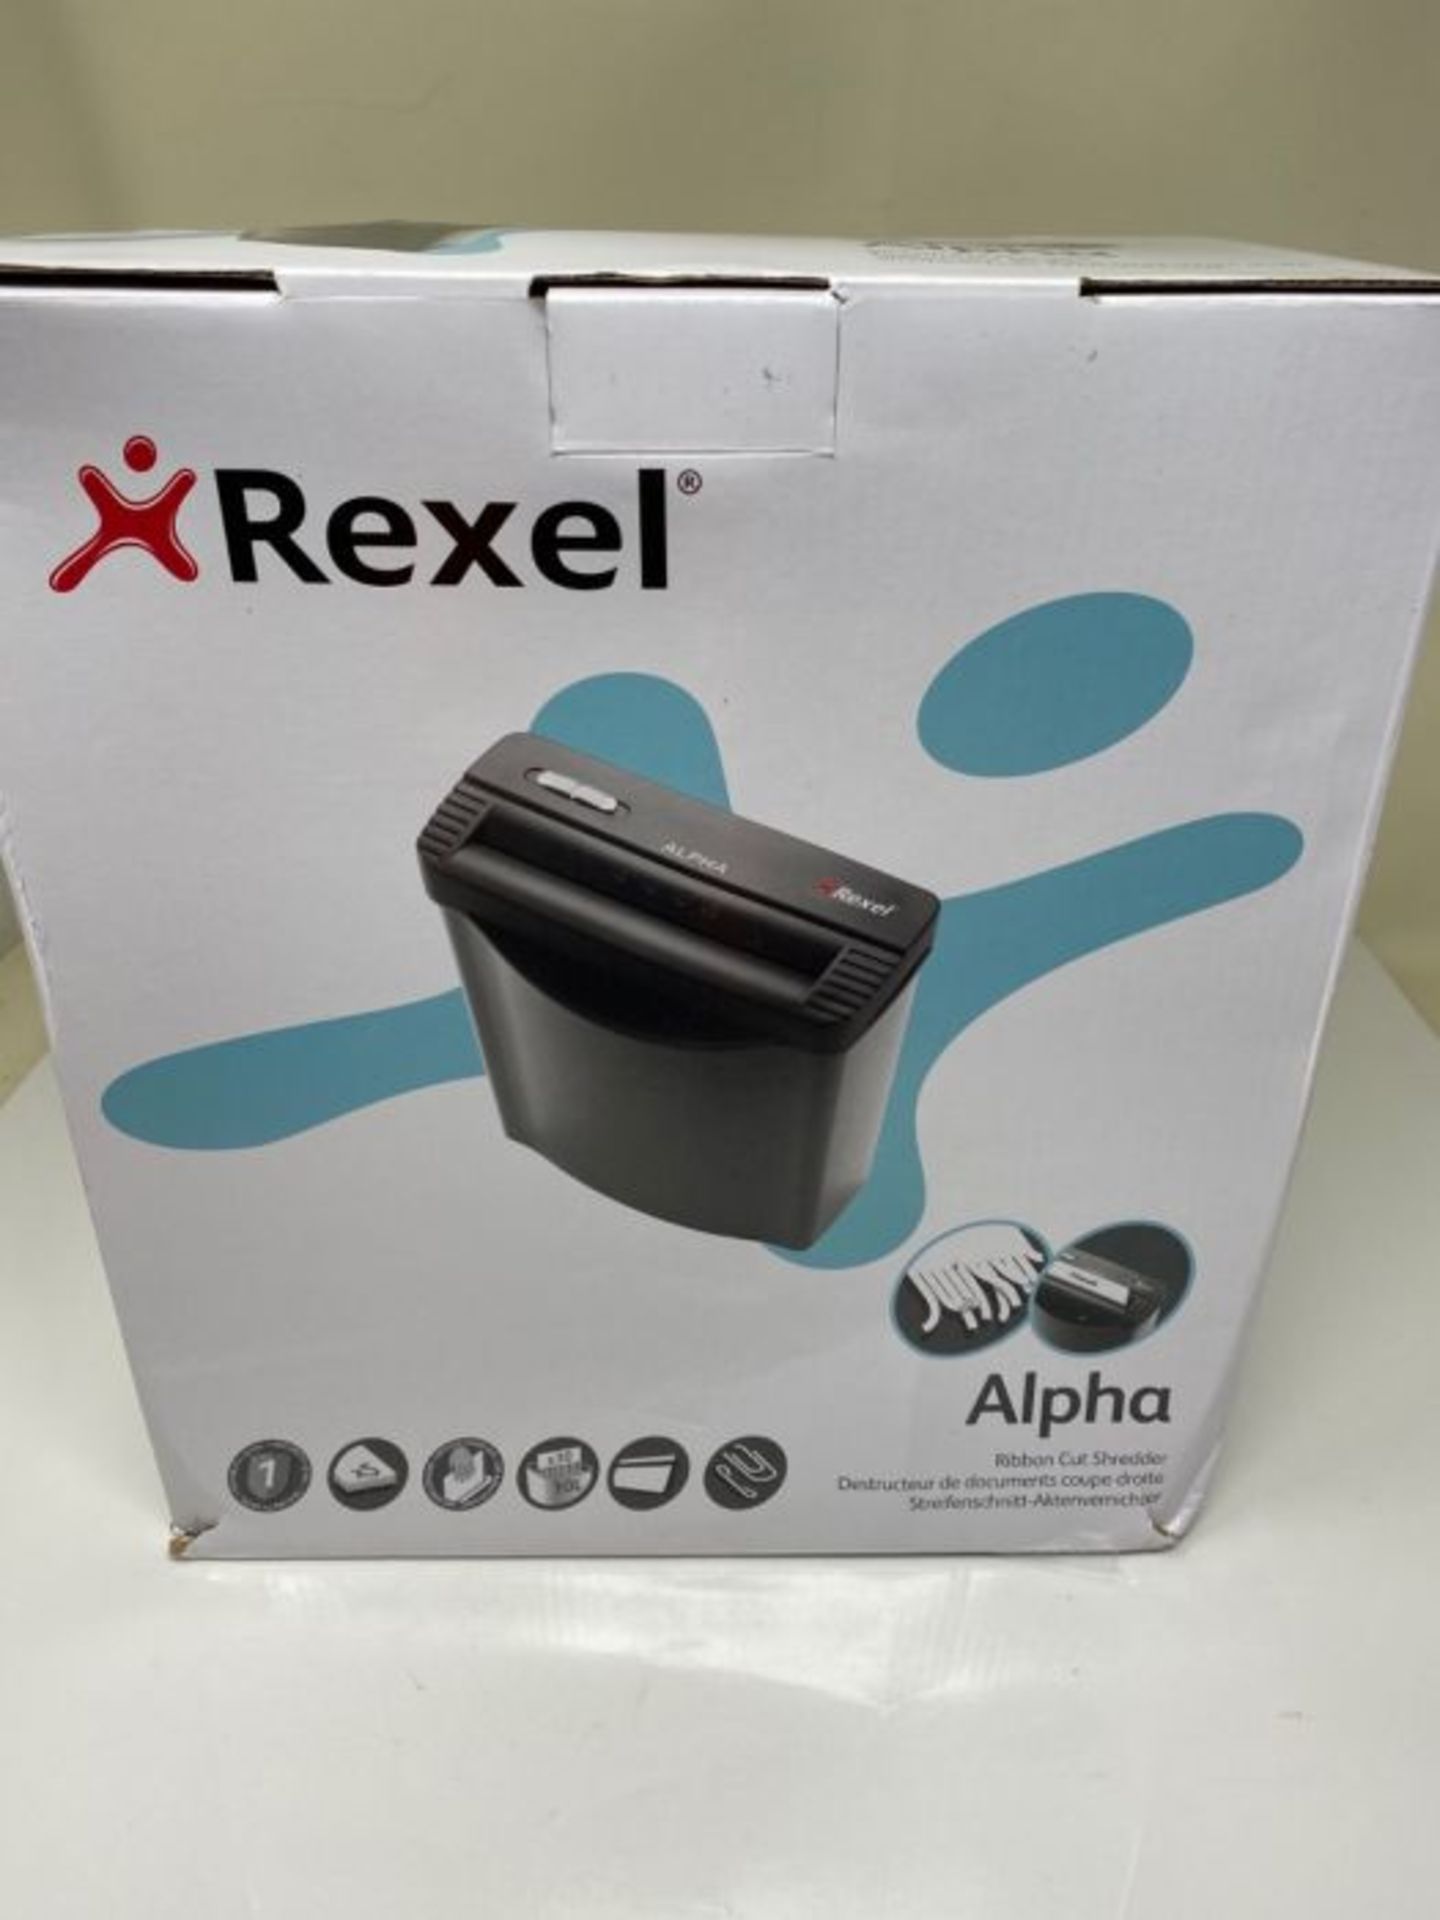 Rexel 1202020 Alpha 5 Sheet Manual Strip Cut Shredder for Home or Small Office Use, 10